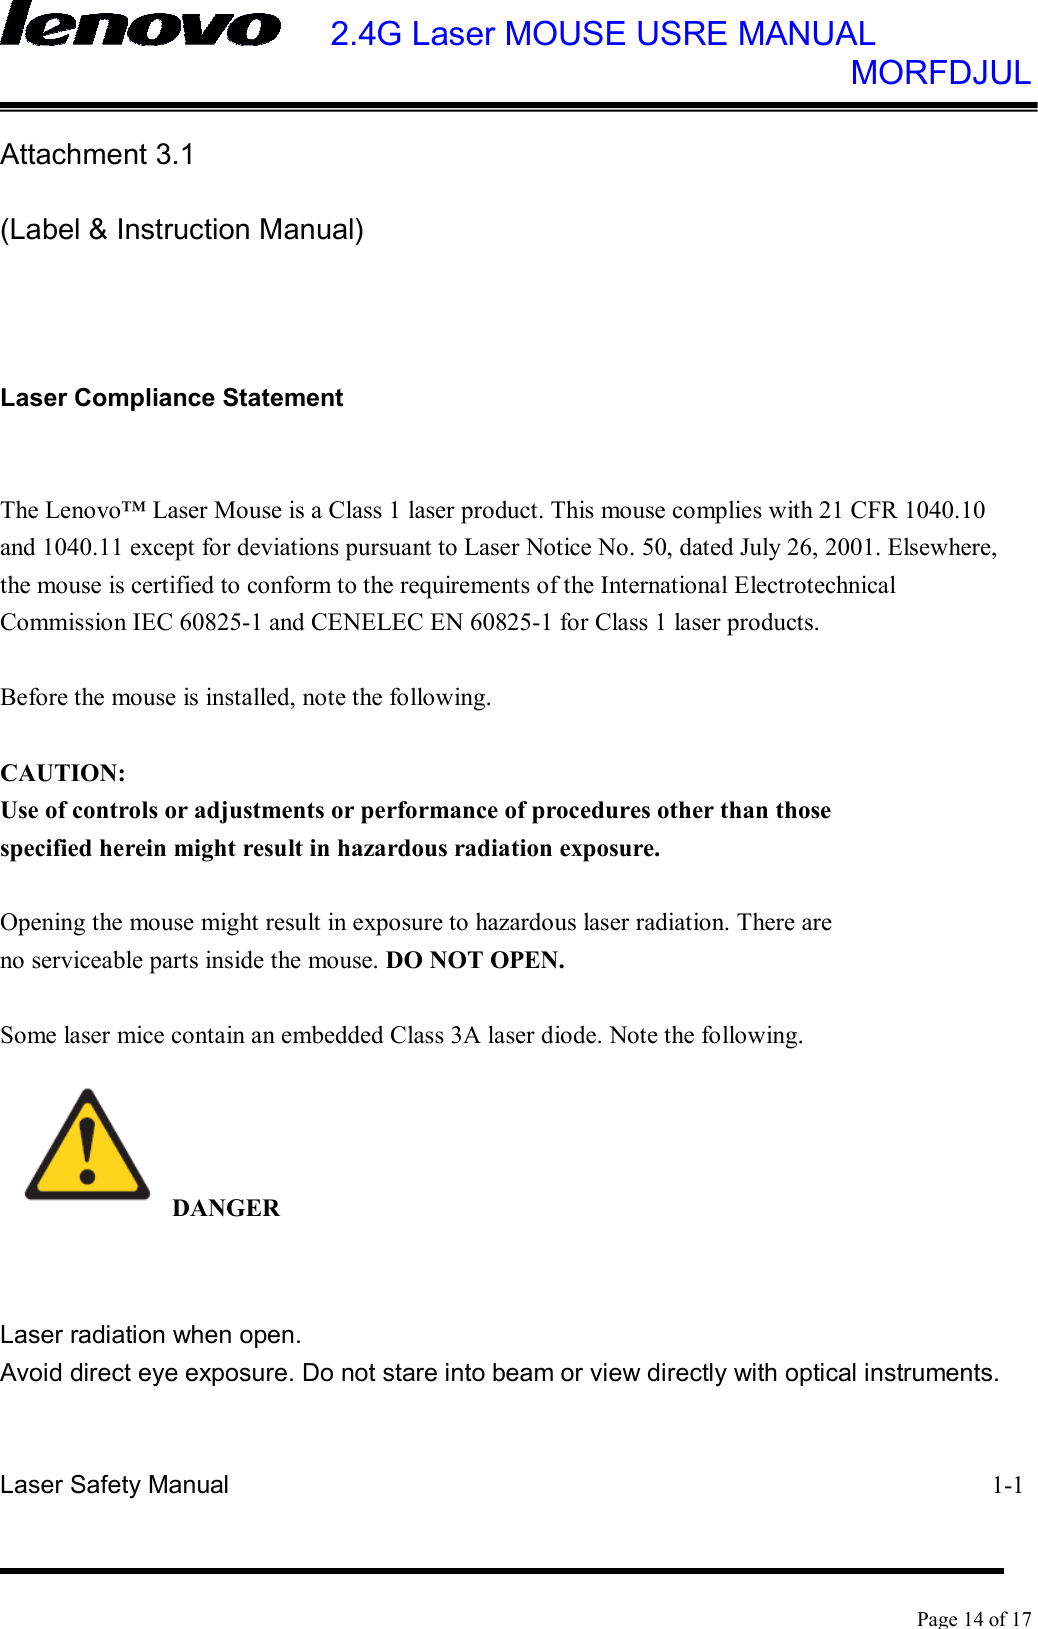    2.4G Laser MOUSE USRE MANUAL            MORFDJUL    Page 14 of 17  Attachment 3.1 (Label &amp; Instruction Manual)   Laser Compliance Statement  The Lenovo™ Laser Mouse is a Class 1 laser product. This mouse complies with 21 CFR 1040.10 and 1040.11 except for deviations pursuant to Laser Notice No. 50, dated July 26, 2001. Elsewhere, the mouse is certified to conform to the requirements of the International Electrotechnical Commission IEC 60825-1 and CENELEC EN 60825-1 for Class 1 laser products.  Before the mouse is installed, note the following.  CAUTION: Use of controls or adjustments or performance of procedures other than those specified herein might result in hazardous radiation exposure.  Opening the mouse might result in exposure to hazardous laser radiation. There are no serviceable parts inside the mouse. DO NOT OPEN.  Some laser mice contain an embedded Class 3A laser diode. Note the following.  DANGER  Laser radiation when open. Avoid direct eye exposure. Do not stare into beam or view directly with optical instruments.  Laser Safety Manual                                                             1-1 